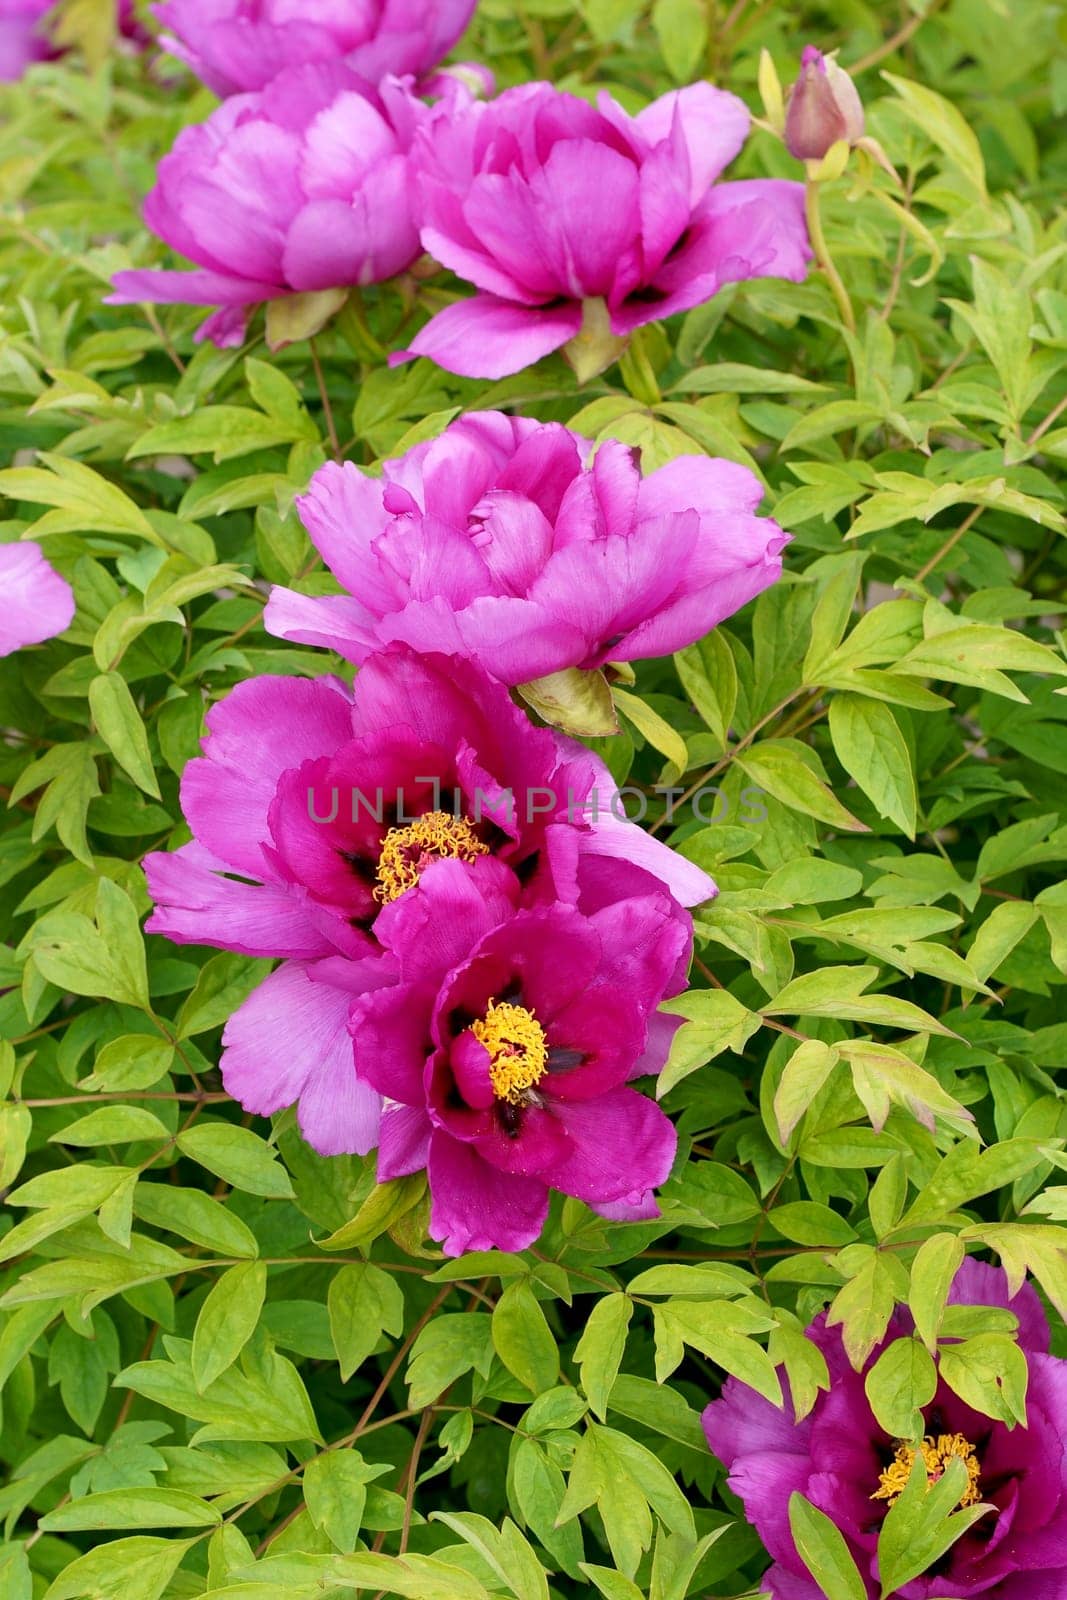 tree peony. Pink Flower of Tree Peony Blooming in the garden. Beautiful Petals of Paeonia sect.